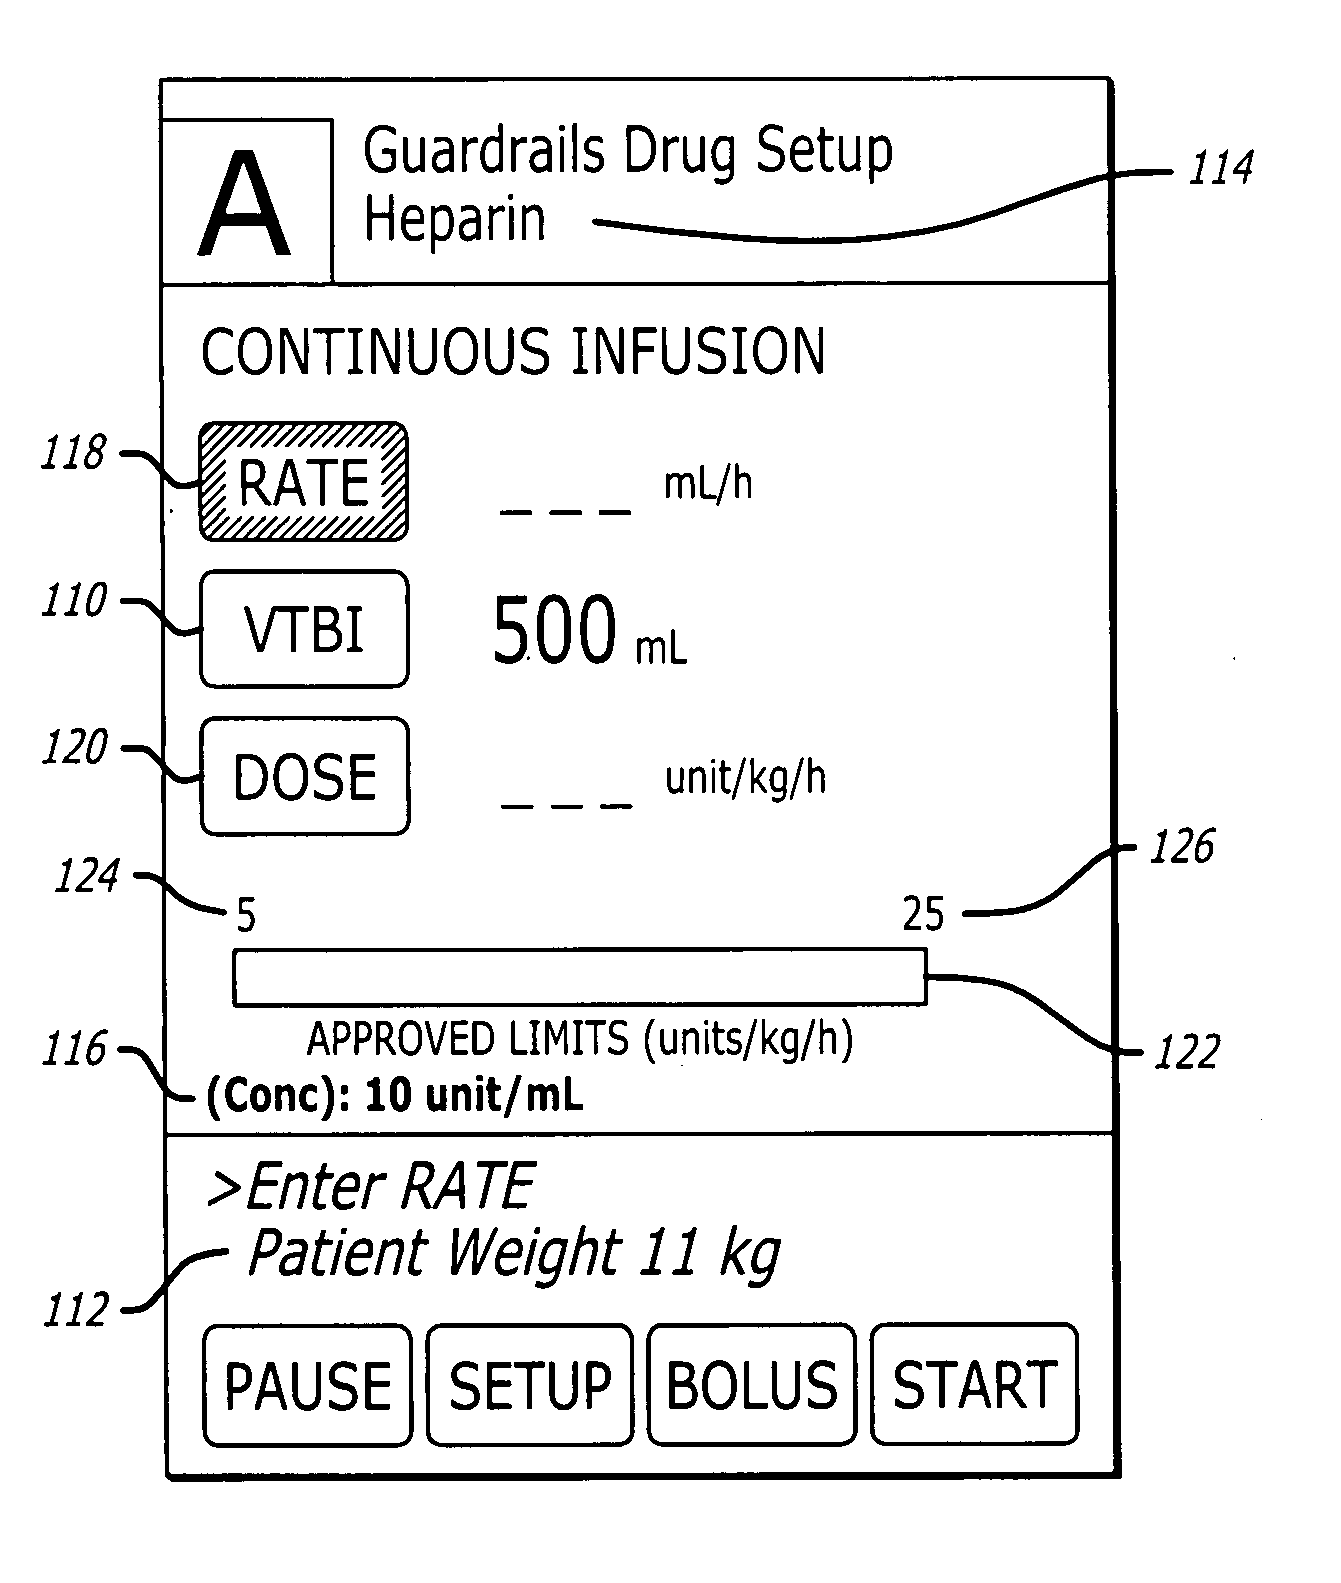 Graphical display of medication limits and delivery program